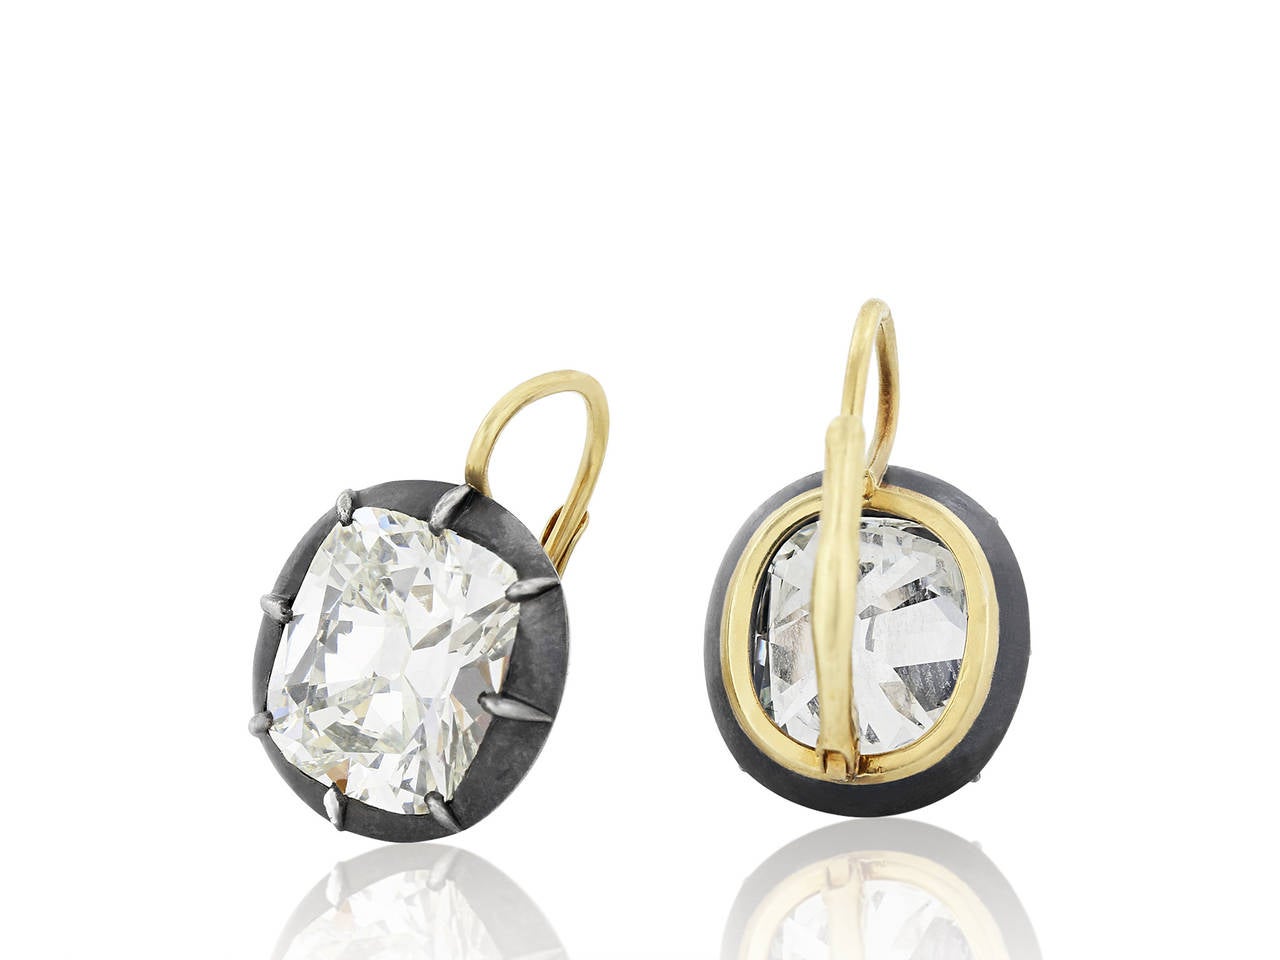 Sterling silver on 18 karat yellow gold vintage style drop earrings consisting of 2 cushion cut diamonds having a total weight of 8.78 carats, one diamond weighing 4.36 carats having a color and clarity of J/VS1, the second weighing 4.42 carats